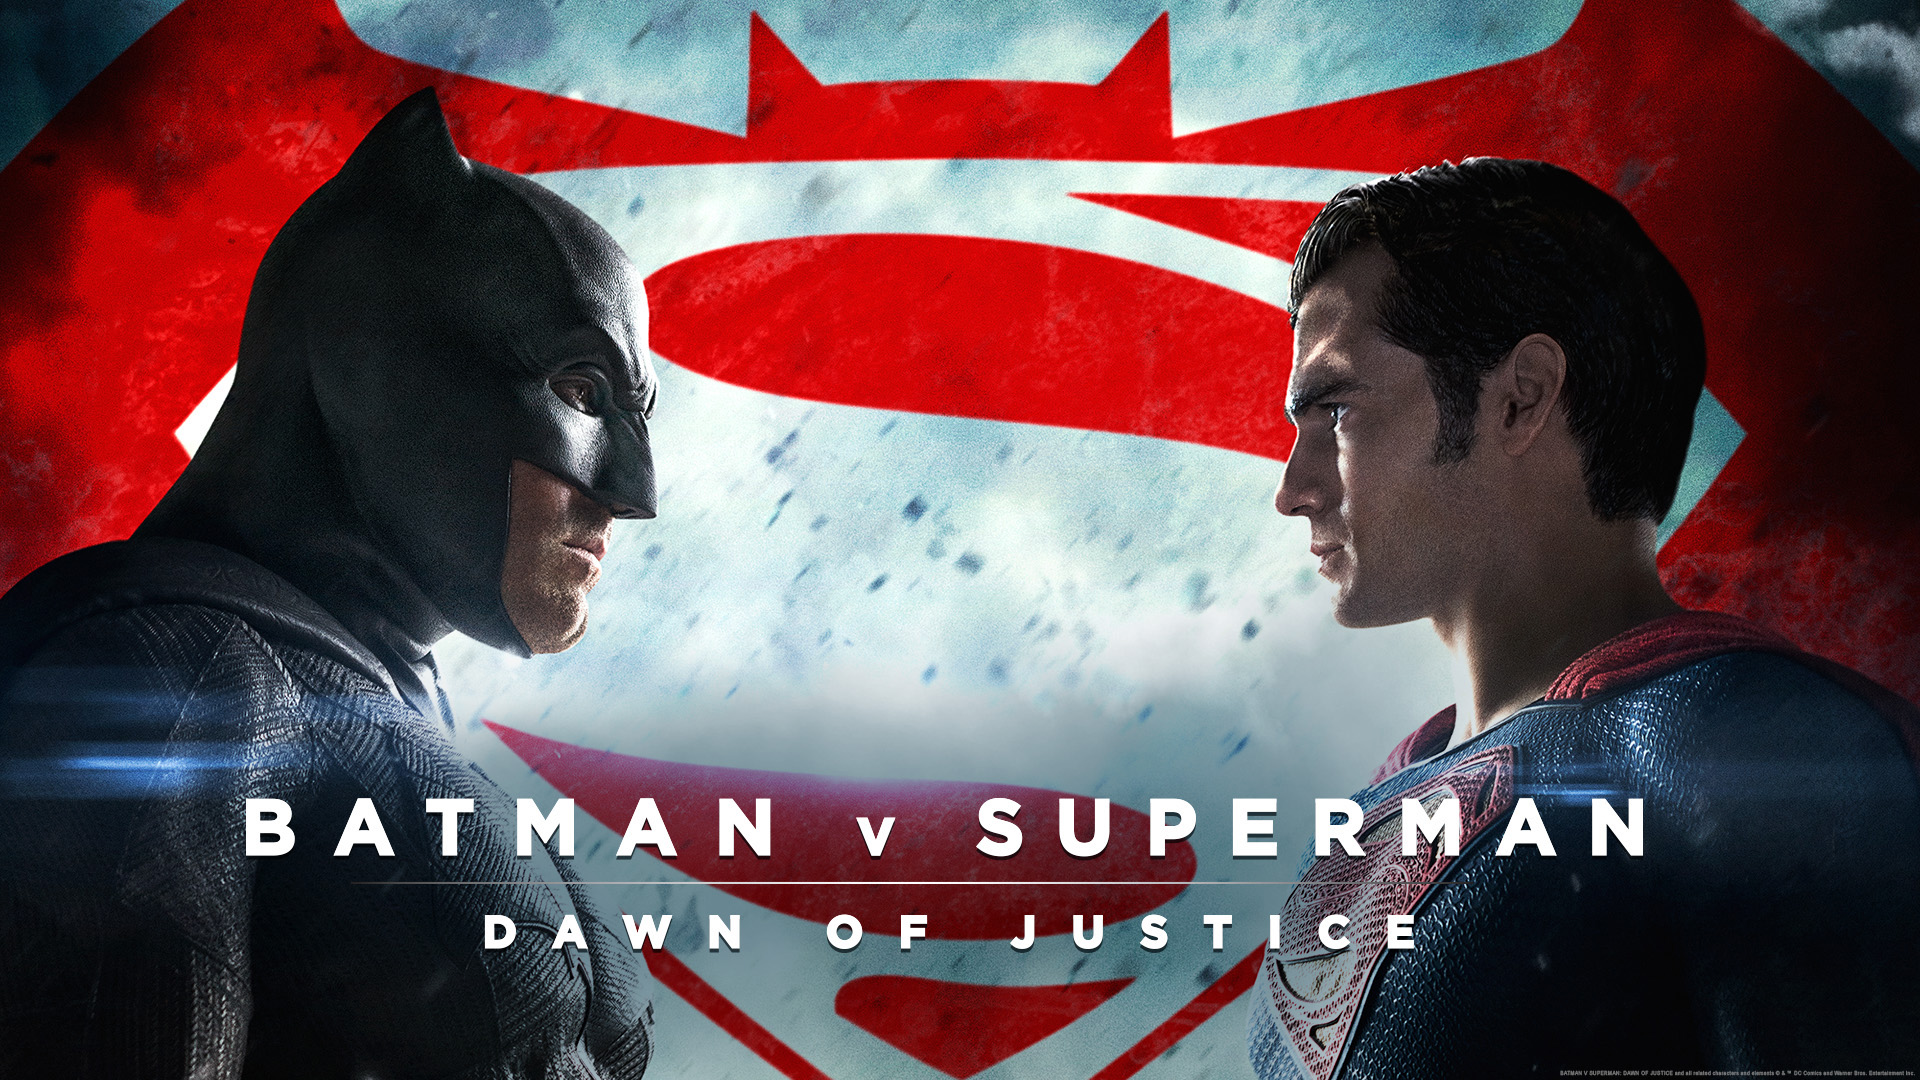 Watch Batman v Superman: Dawn of Justice Online with NEON